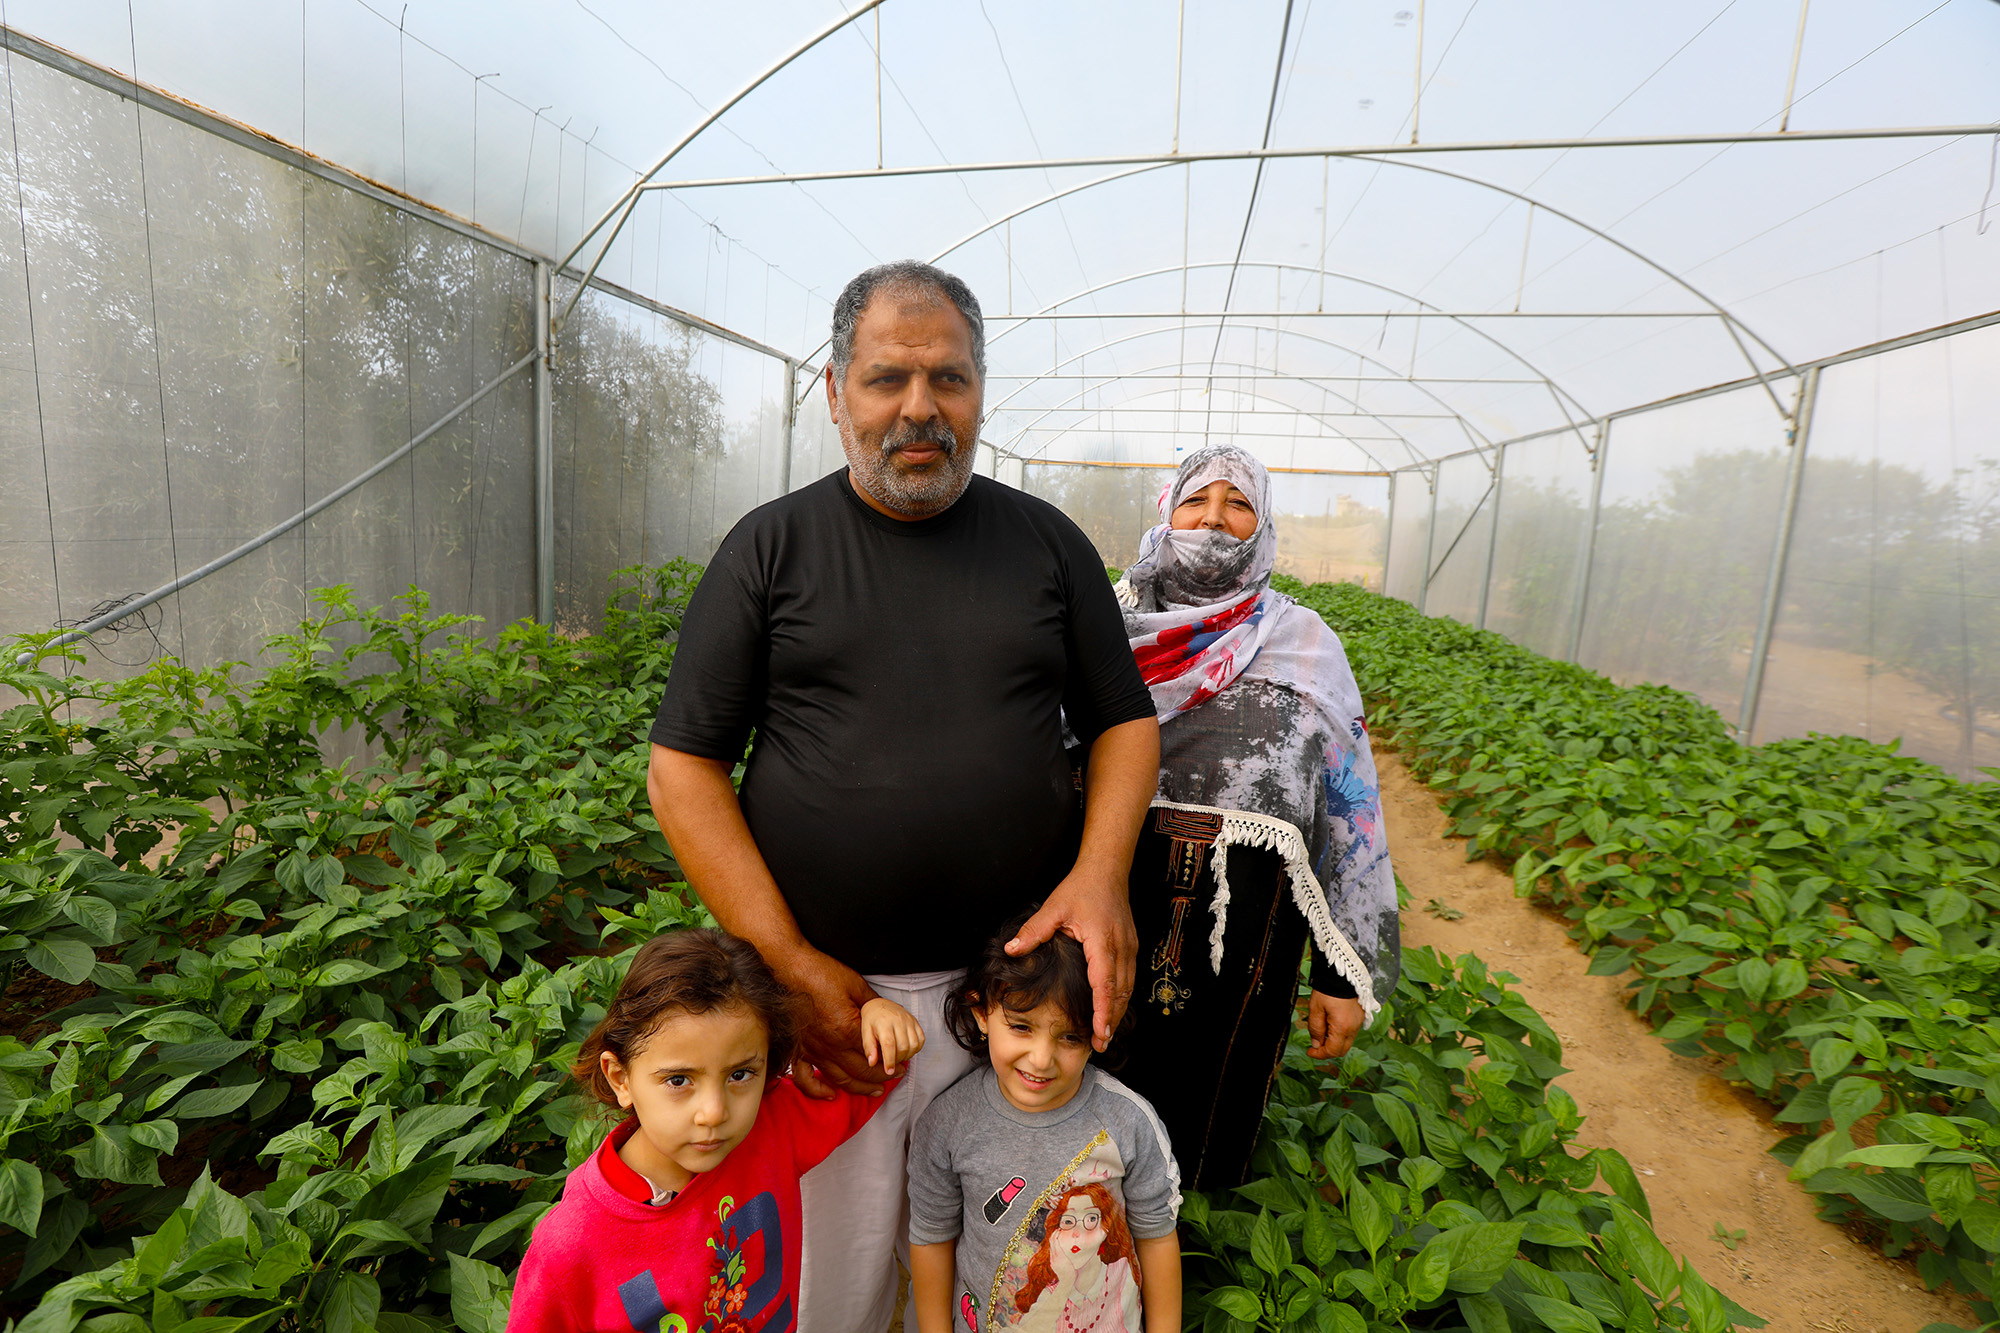 Ibrahim is growing sweet peppers in his new greenhouse. His grandmother, Ahlam, and two of his daughters, Samira and Ahlam, are helping with the harvest today.